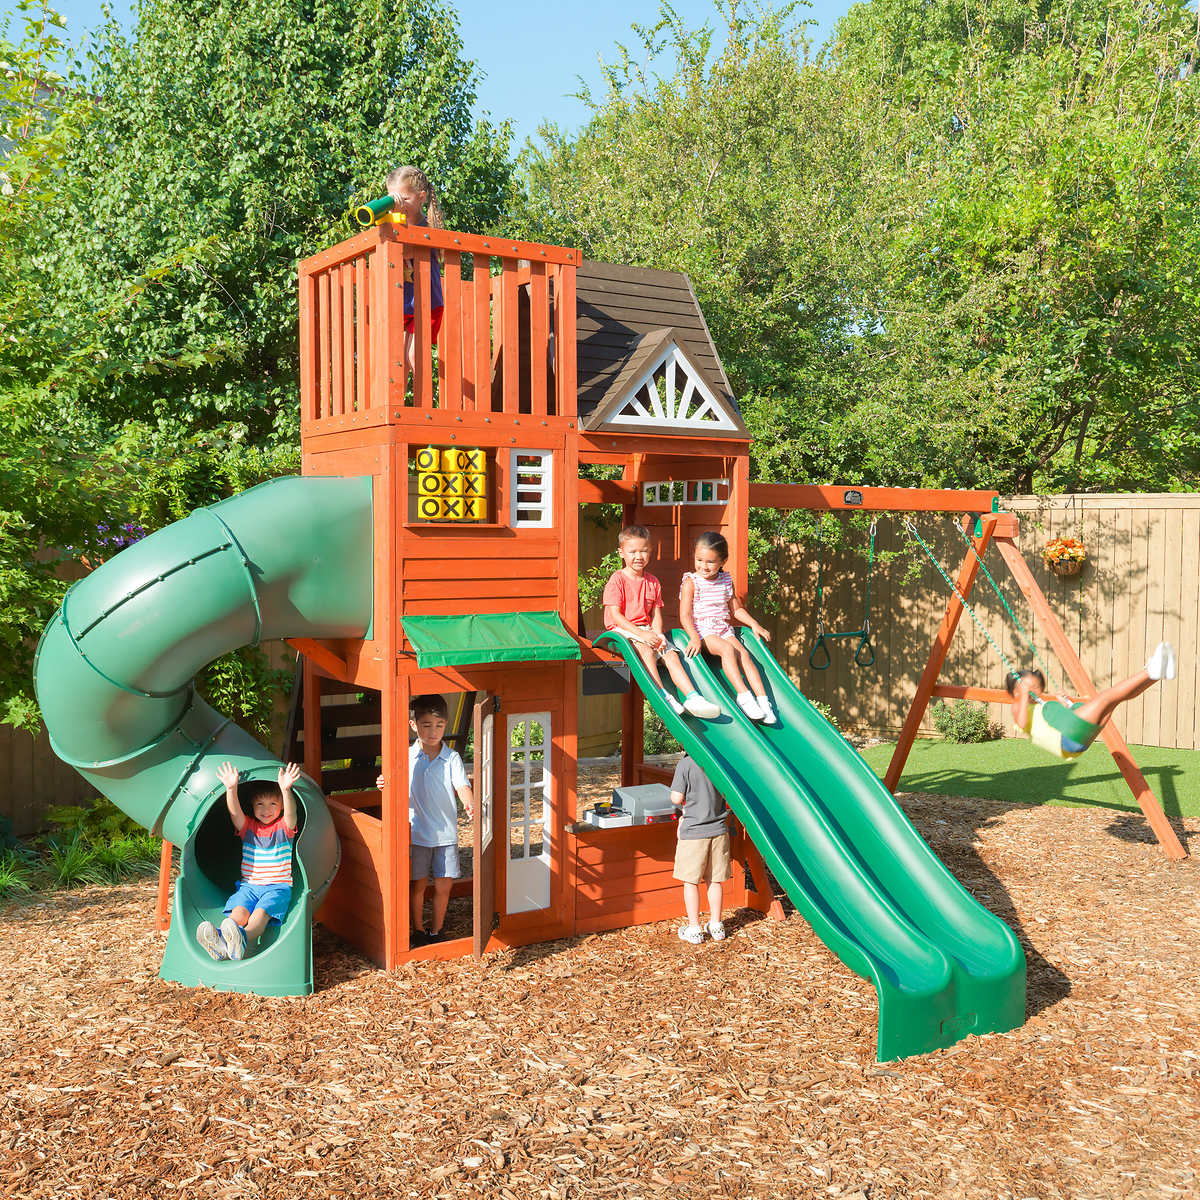 10 Best Swing Sets for Your Yard 2022 - Best Backyard Playsets